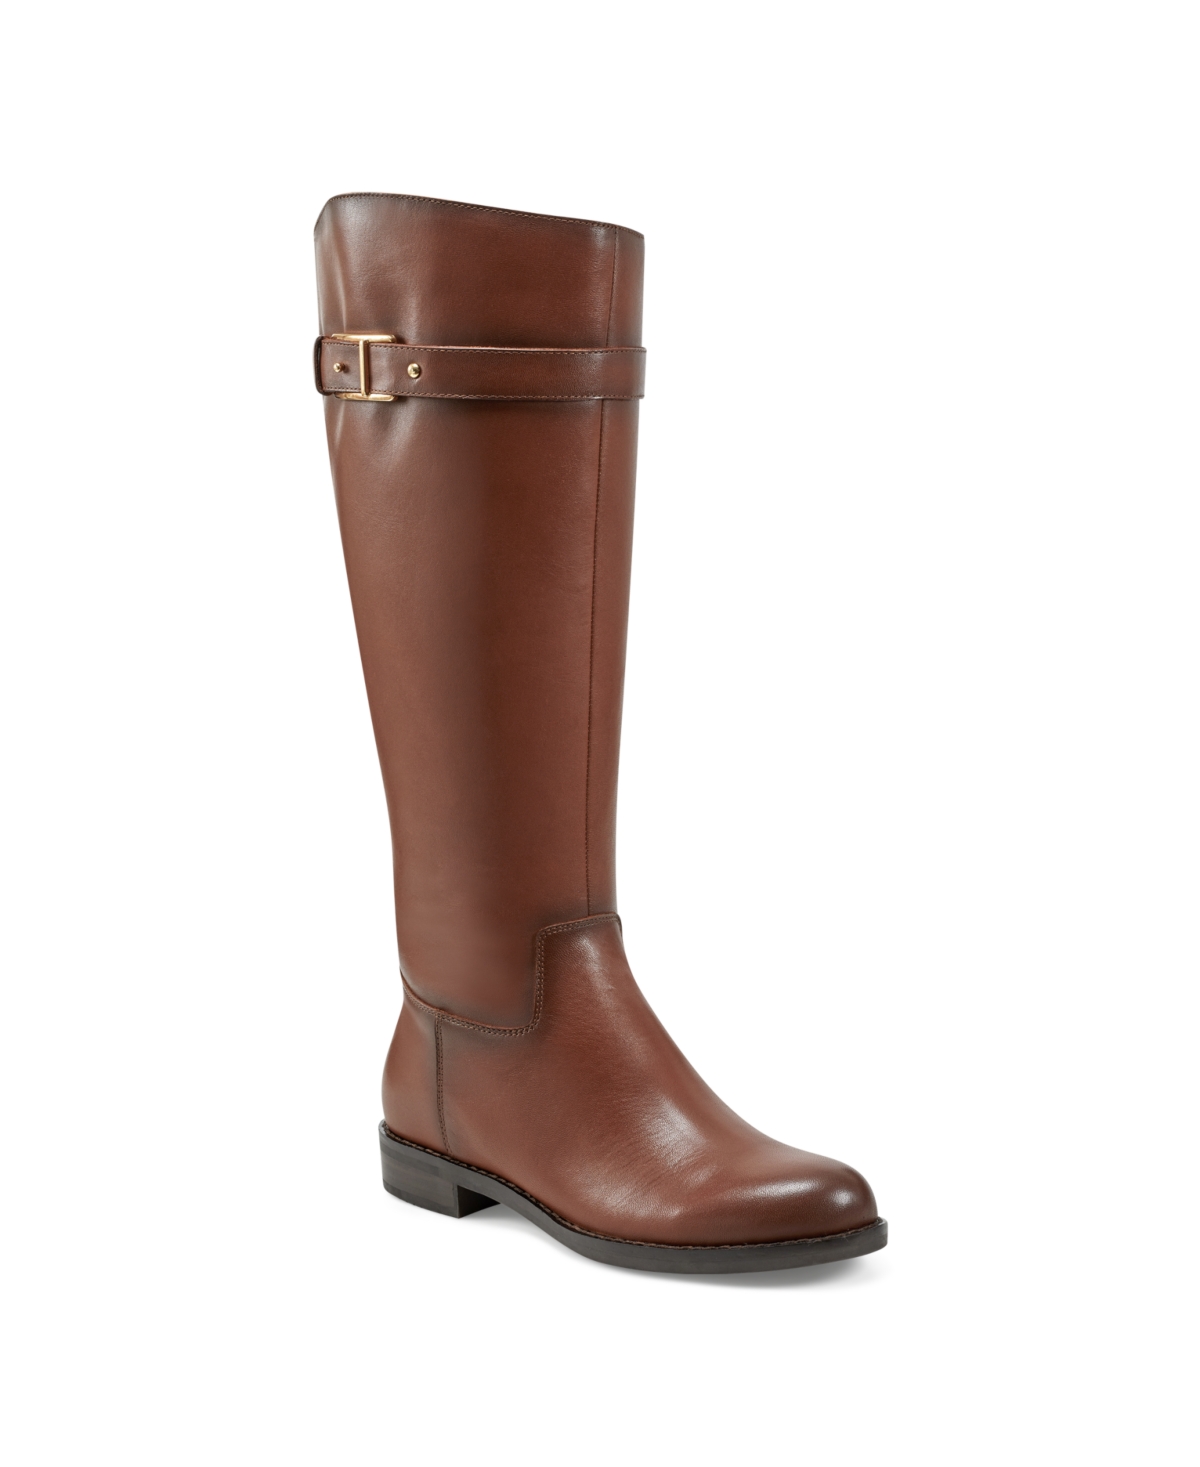 Women's Aubrey Round Toe Casual Riding Boots - Medium Brown Leather